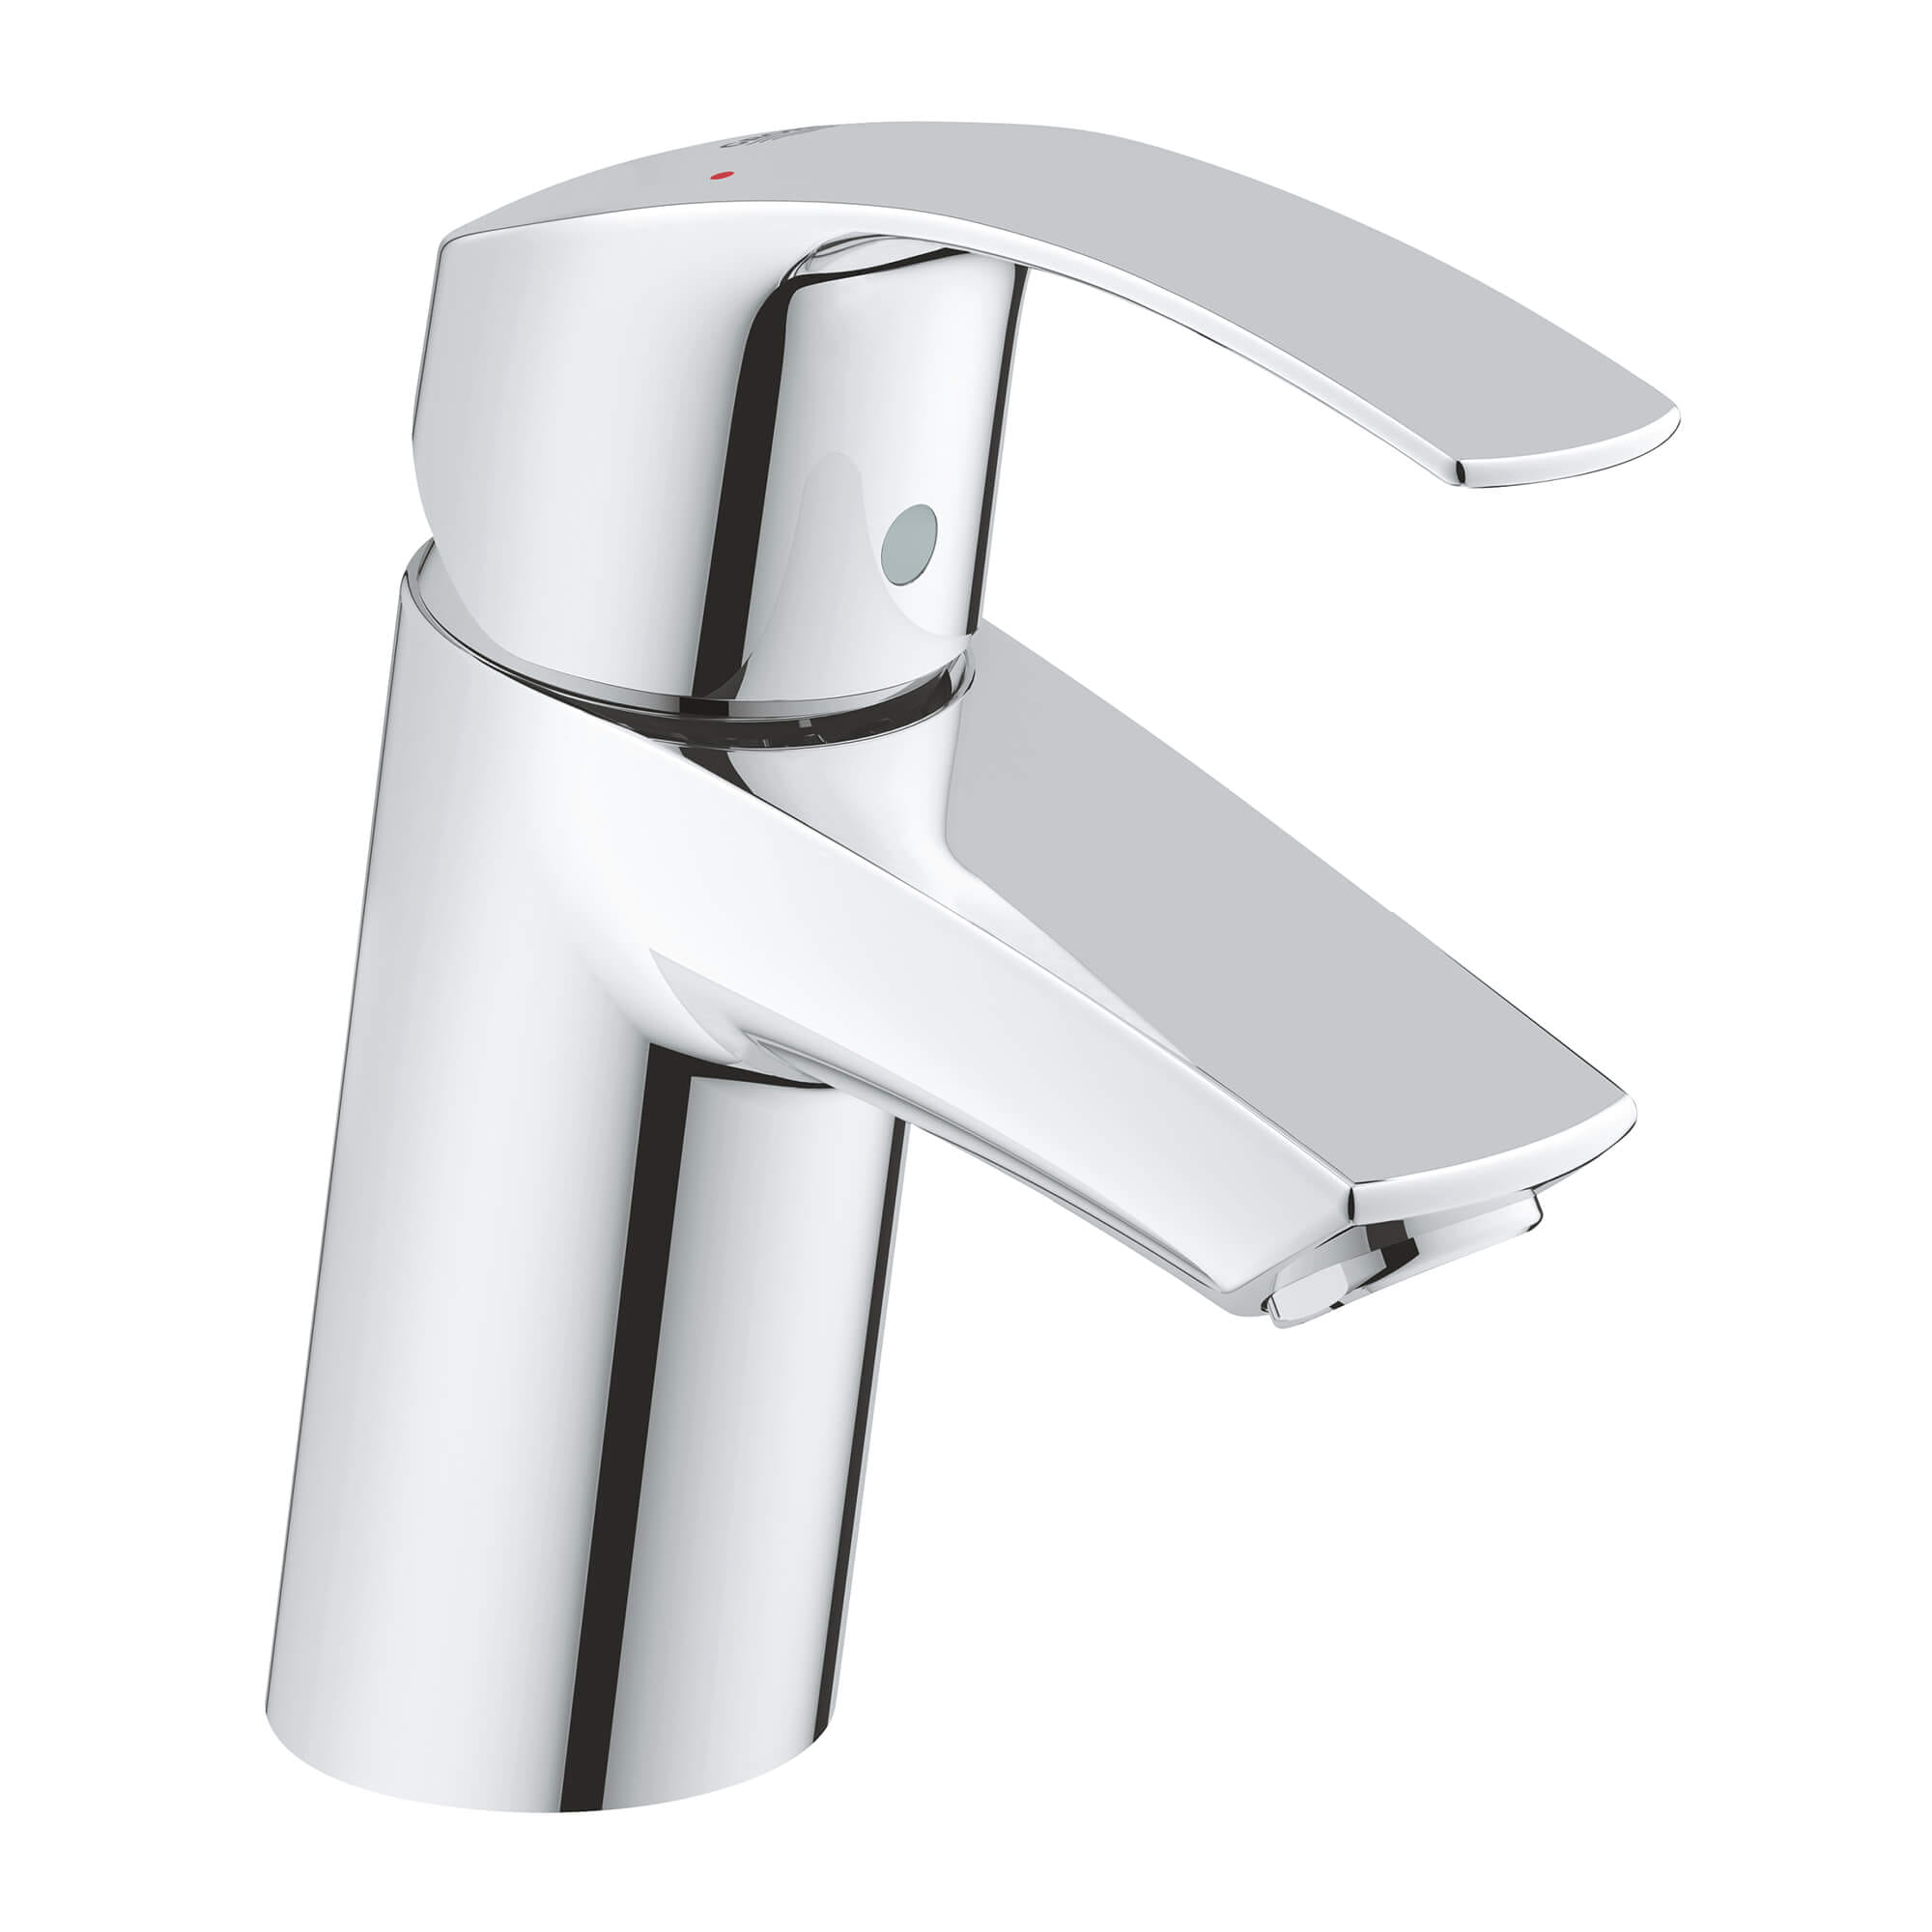 SINGLE HOLE SINGLE-HANDLE S-SIZE BATHROOM FAUCET 1.2 GPM LESS DRAIN-related